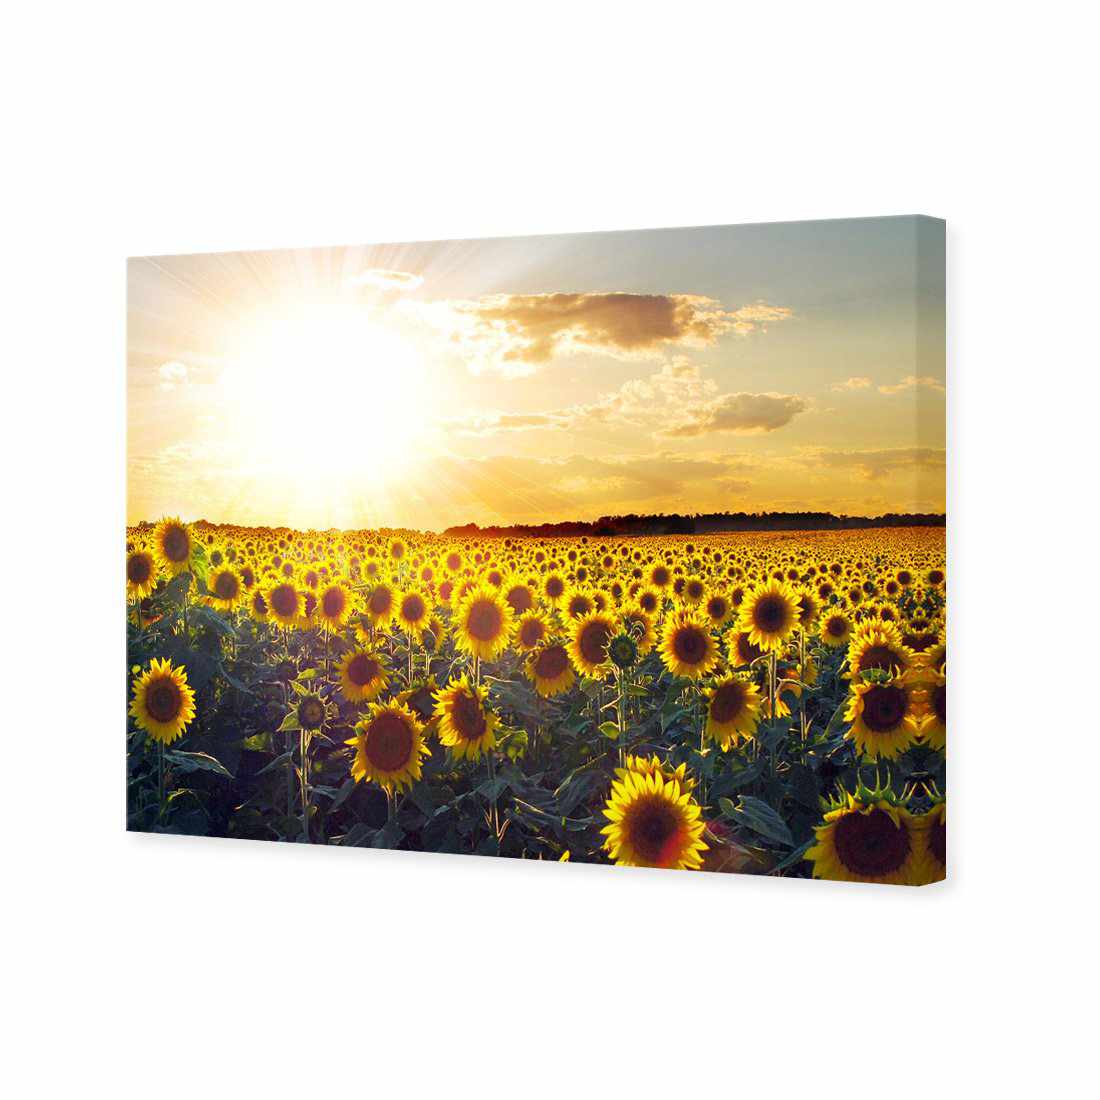 Sunflowers At Sunset Canvas Art-Canvas-Wall Art Designs-45x30cm-Canvas - No Frame-Wall Art Designs